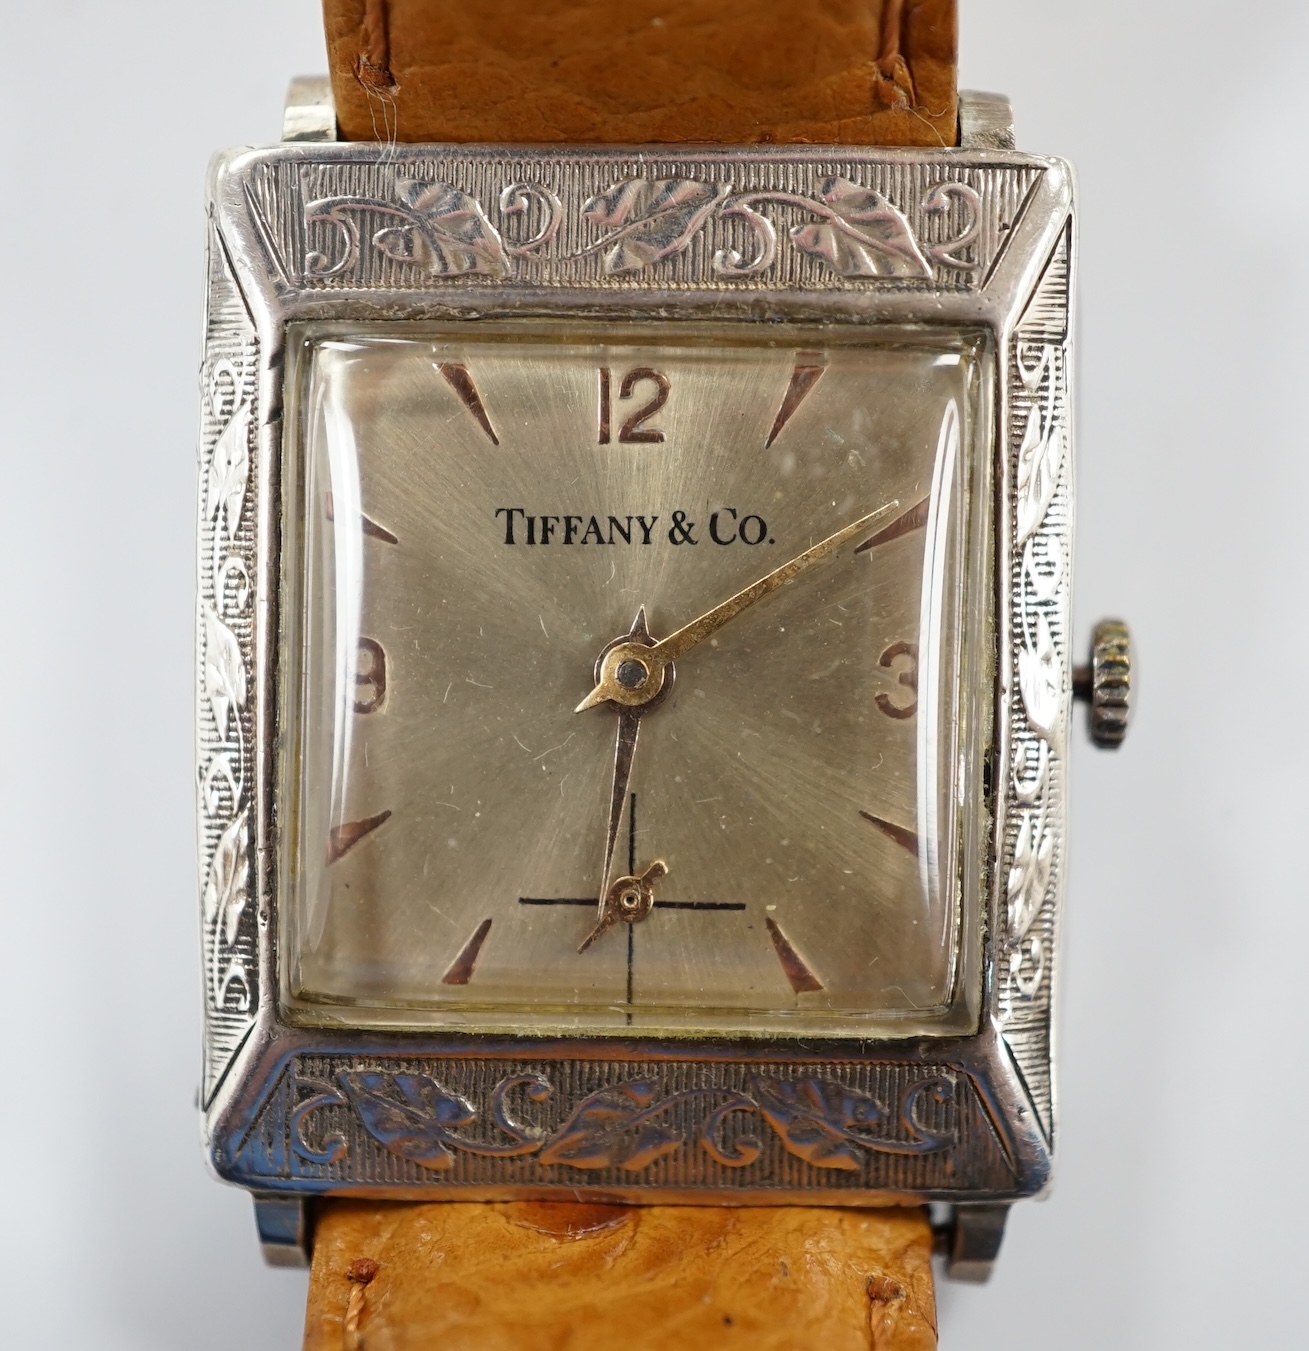 A German sterling manual wind dress wrist watch, retailed by Tiffany & Co, with baton and